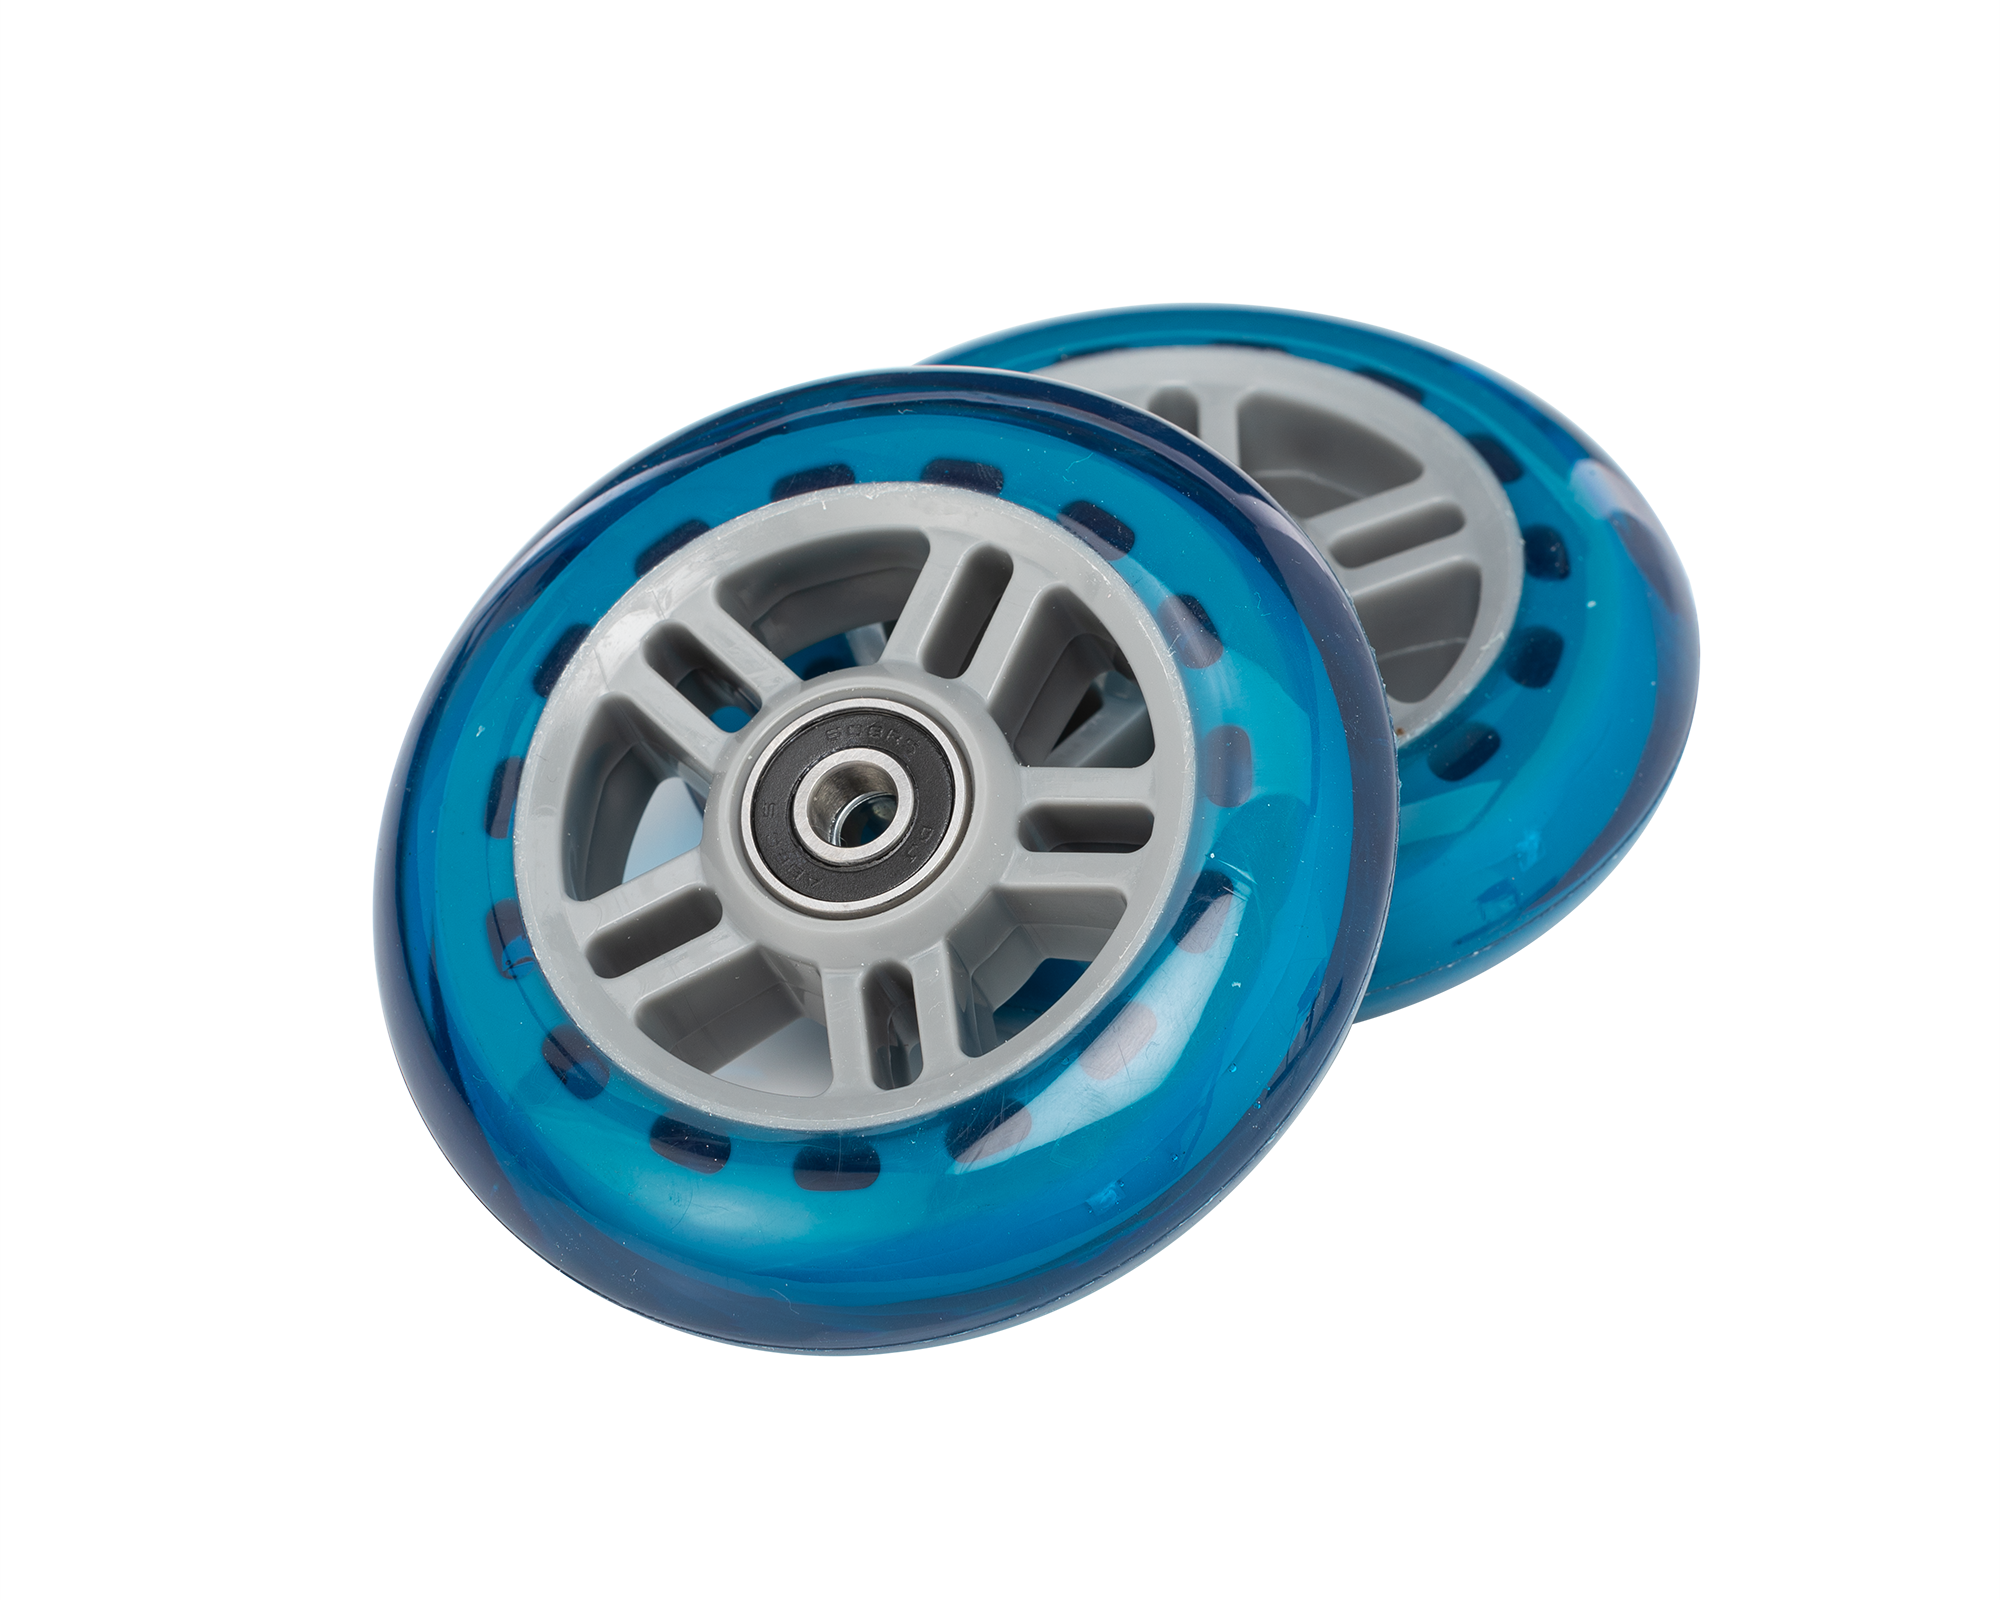 AOWISH 2-Pack 125 mm Scooter Wheels 125mm Kick Scooters Replacement Wheel  with Bearings ABEC-9 for Razor A3 Kick Scooters